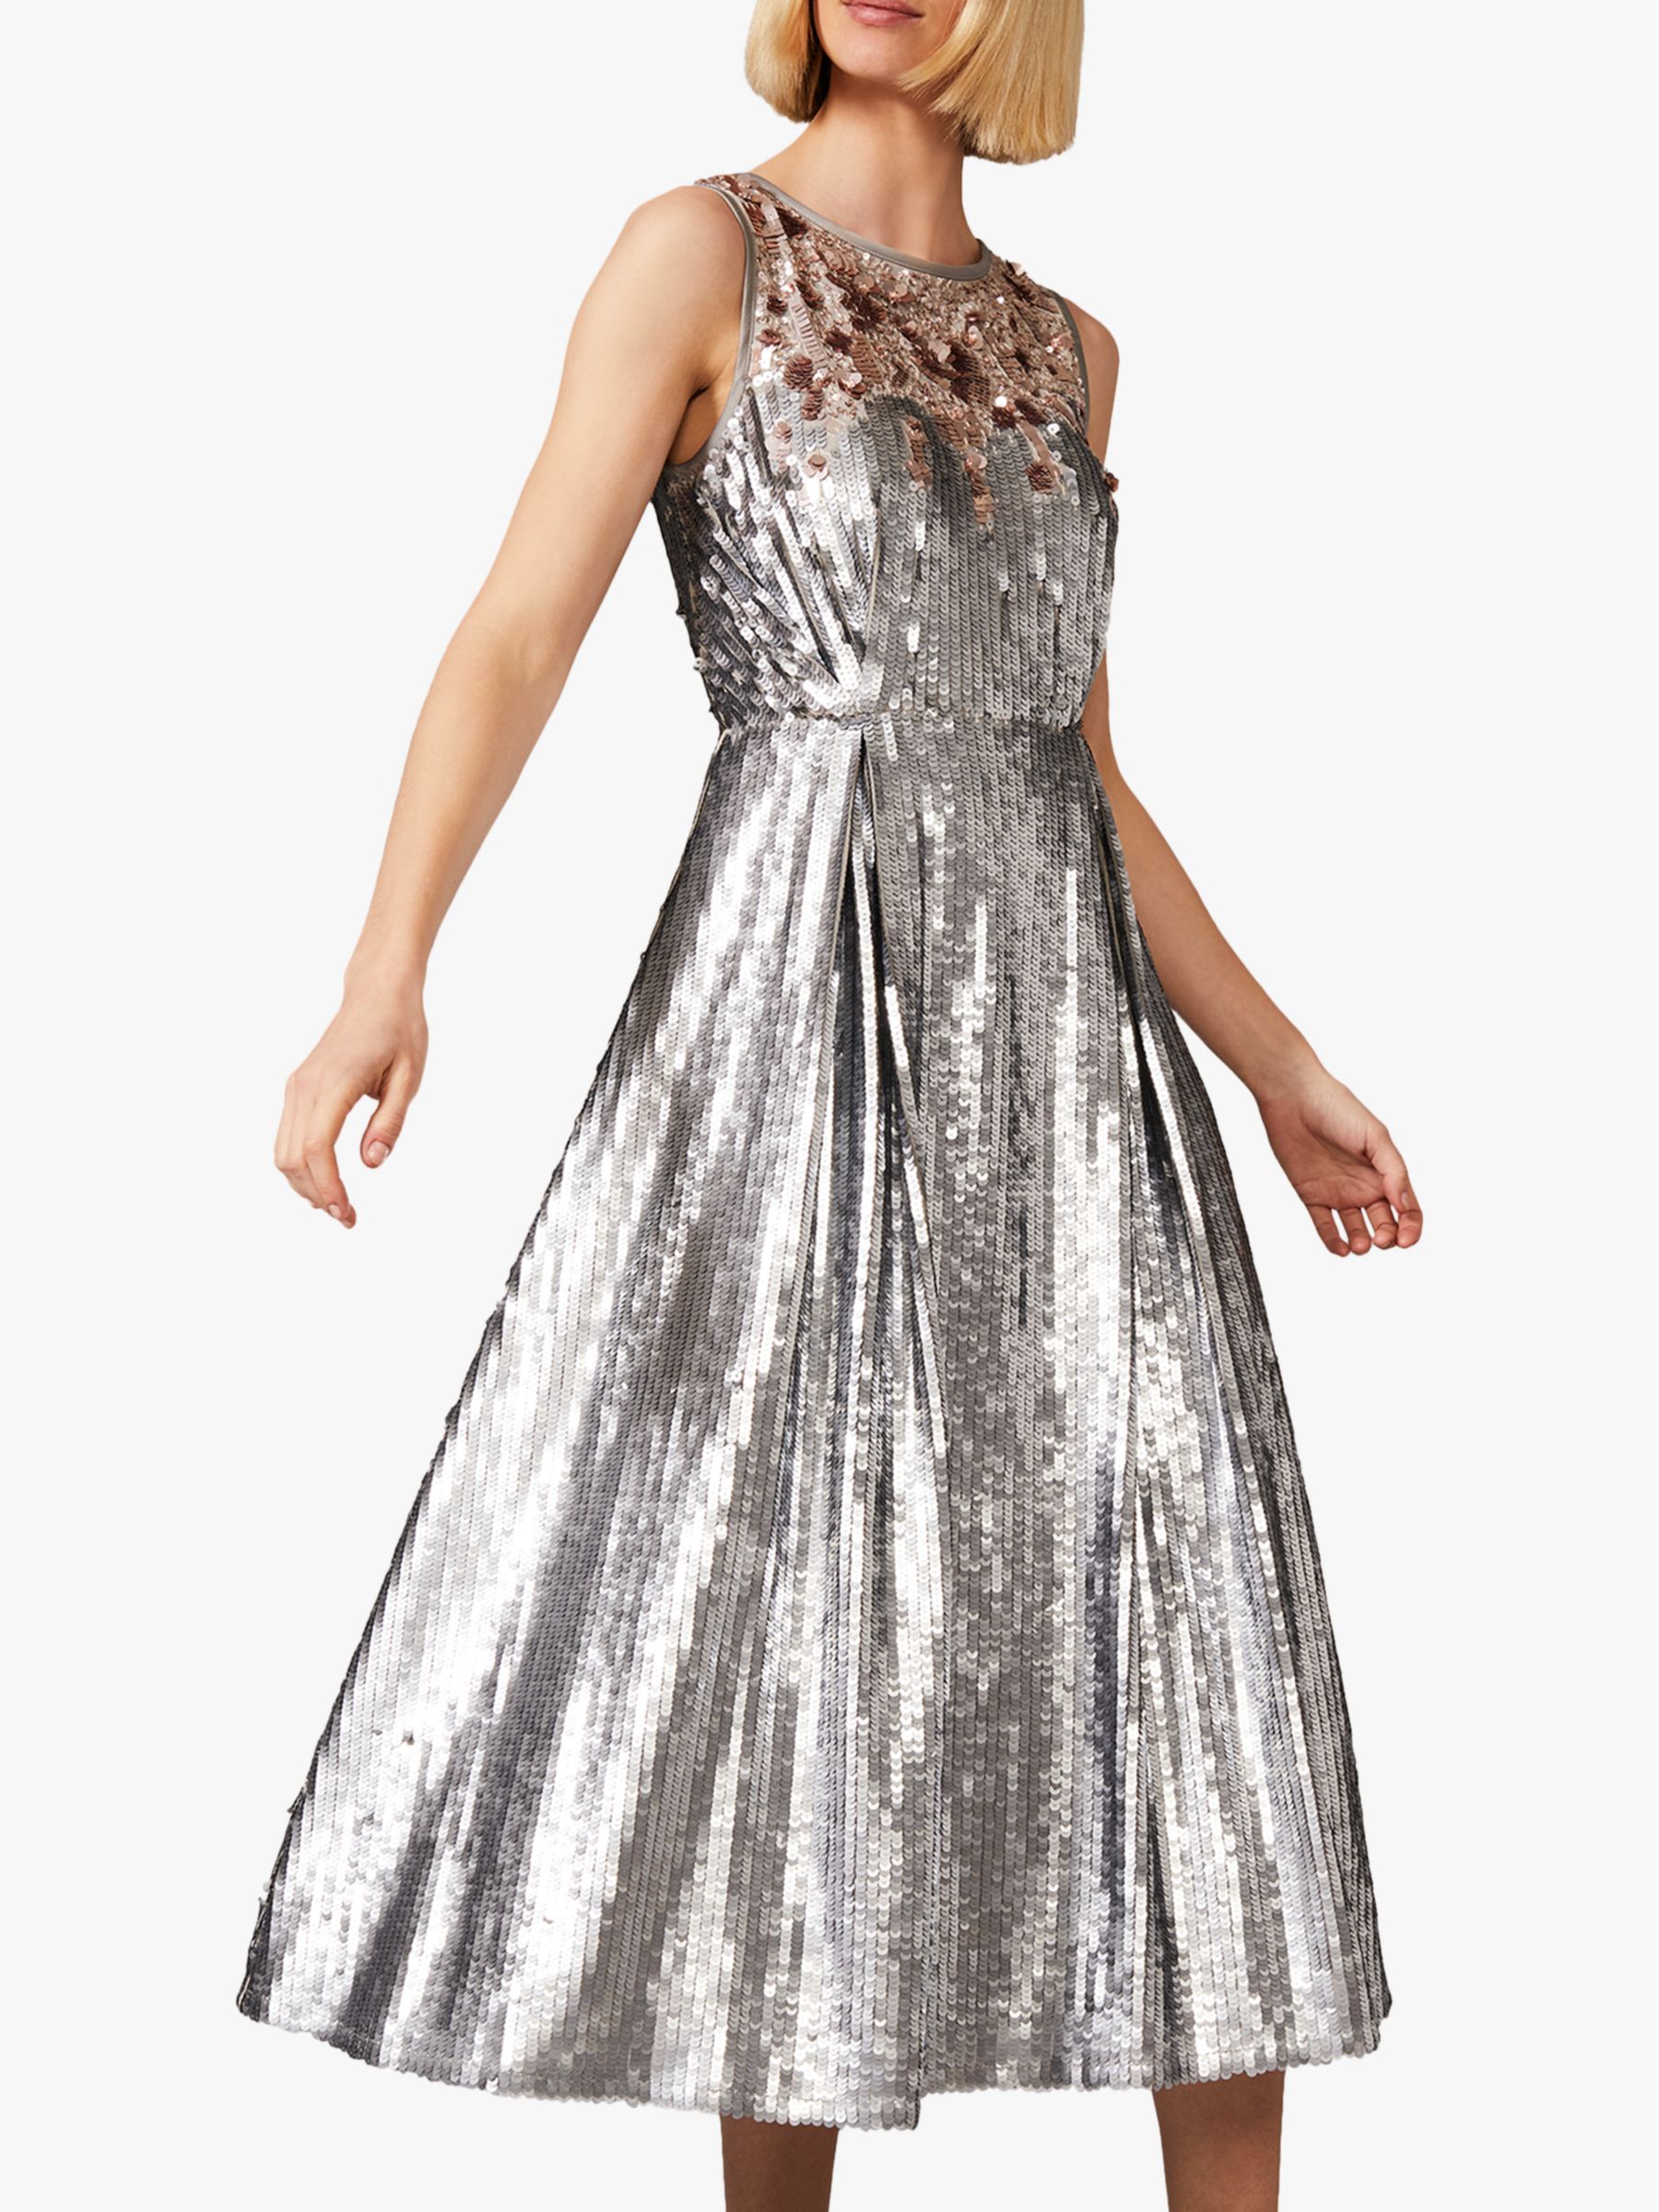 Phase Eight Lainey Shimmer Sequined Midi Dress, Silver, 6